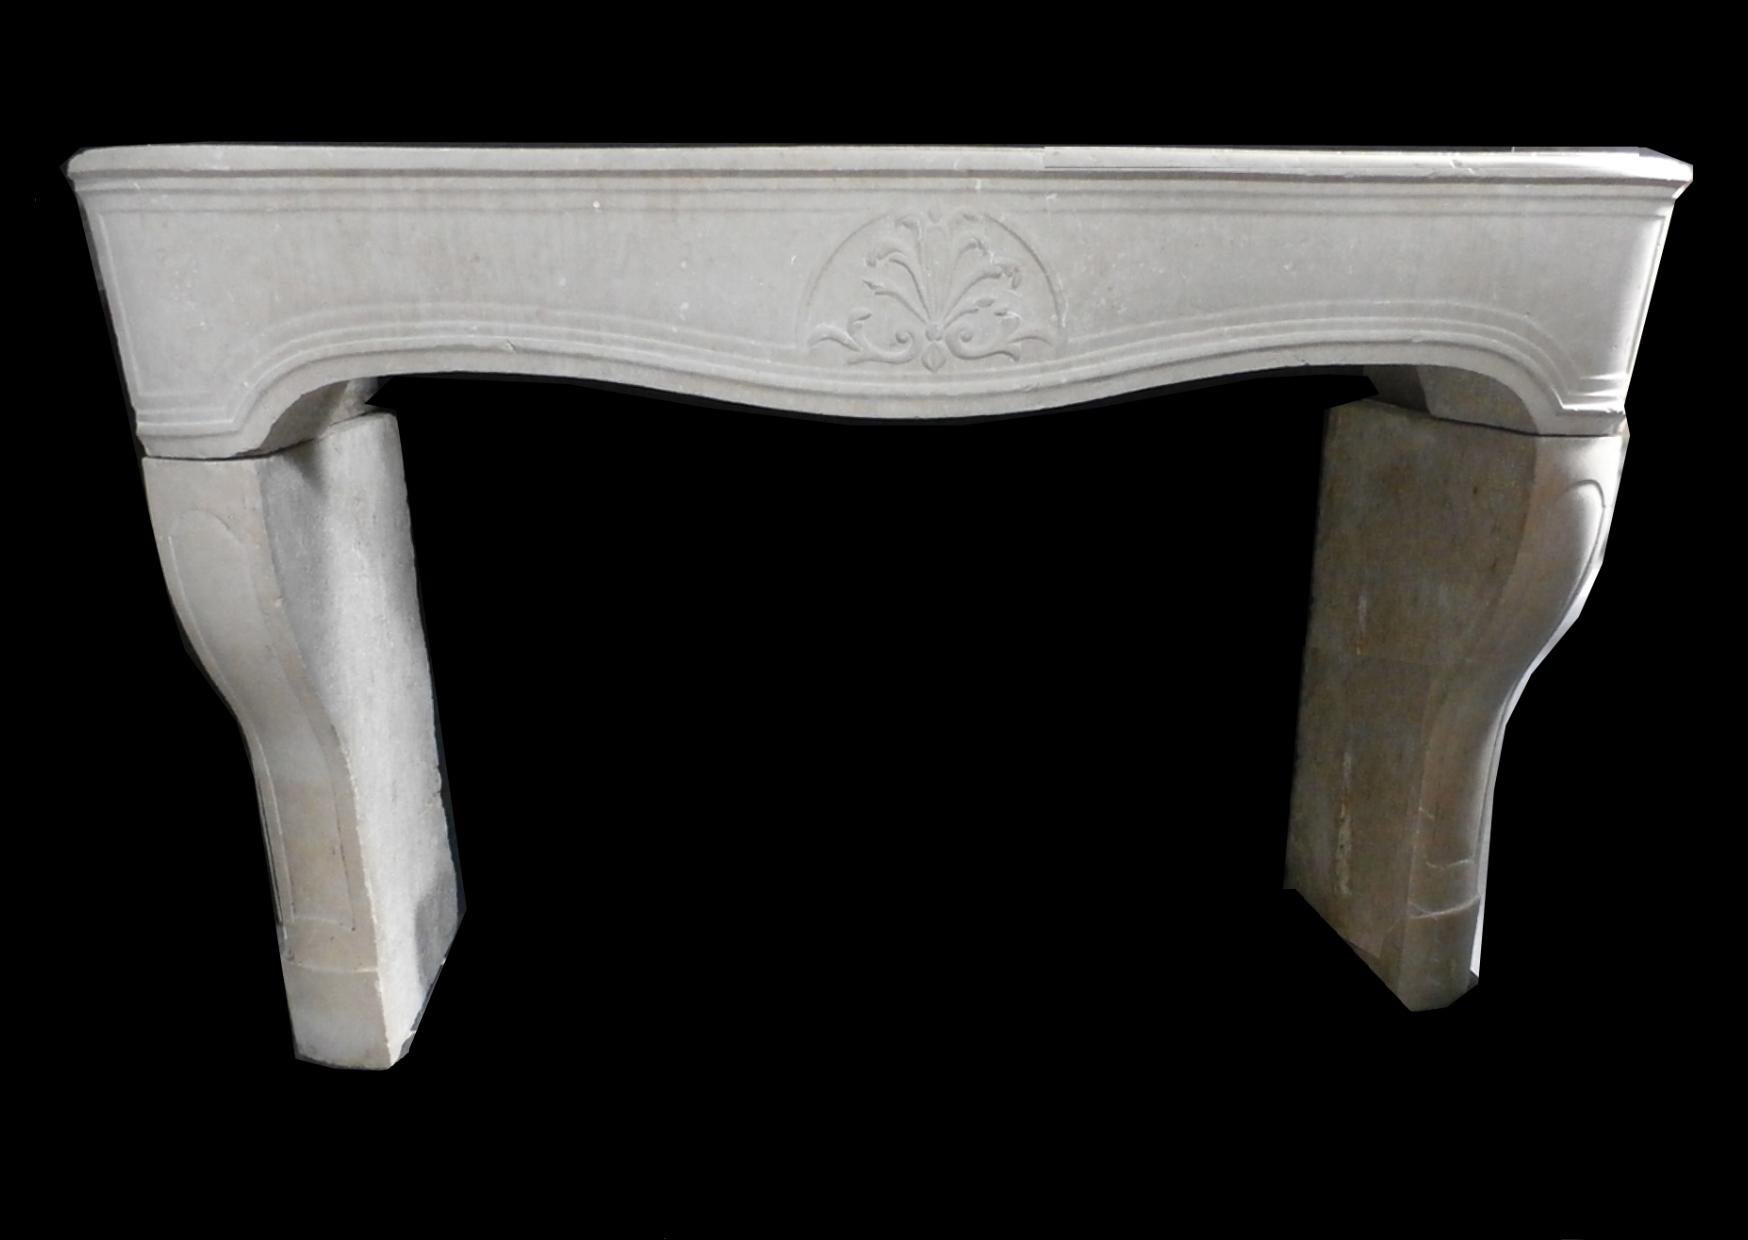 Robust but elegant at the same time, beautiful sand-colored fireplace mantel with light ornamental carving. If you are looking for the perfect piece to complement your Classic or modern sophisticated interior, this fireplace with its soft curves is